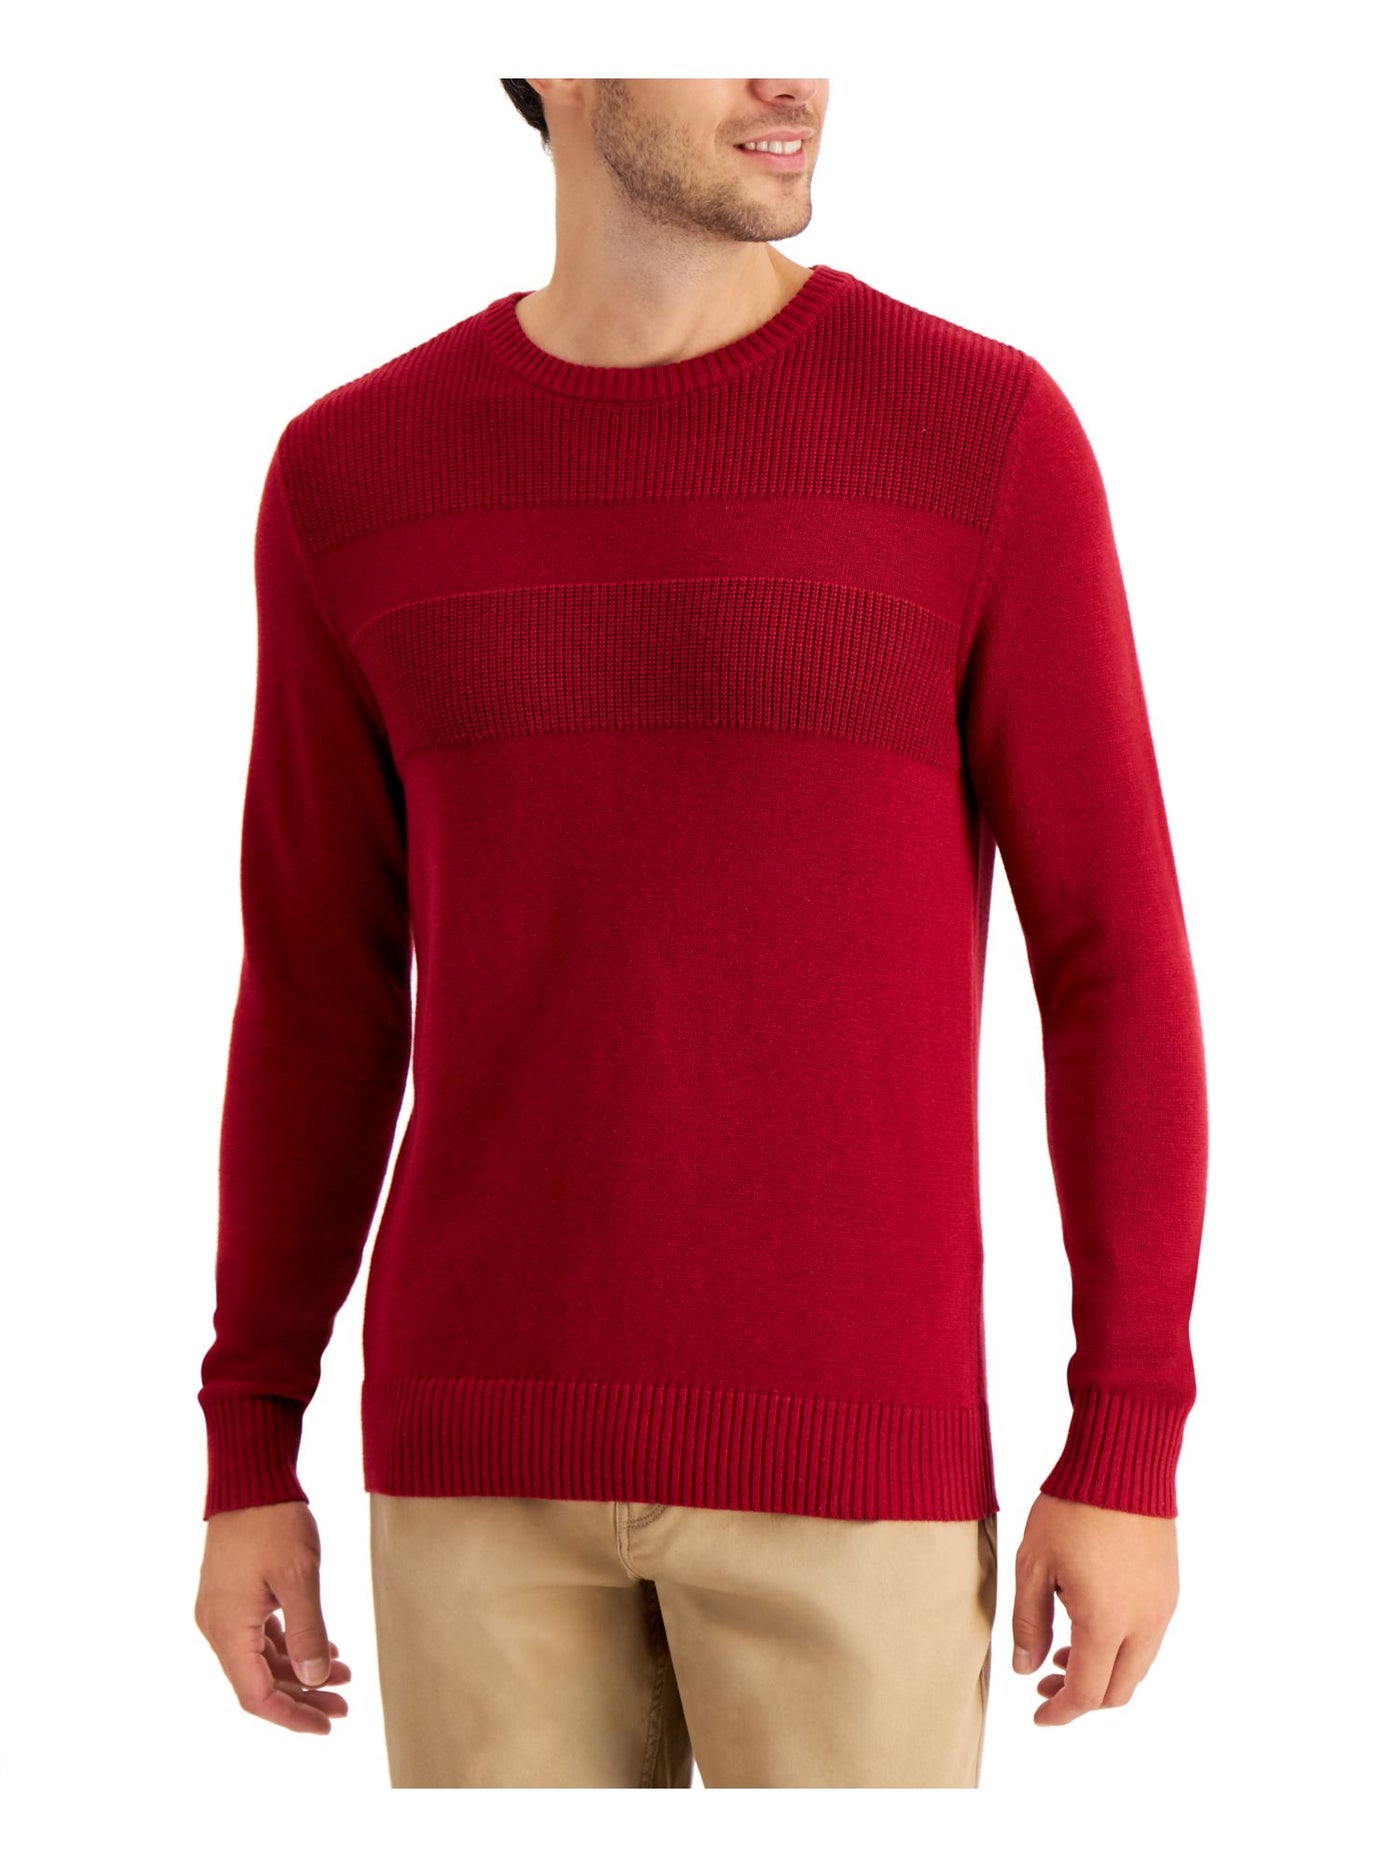 CLUBROOM Mens Red Crew Neck Pullover Sweater XXL